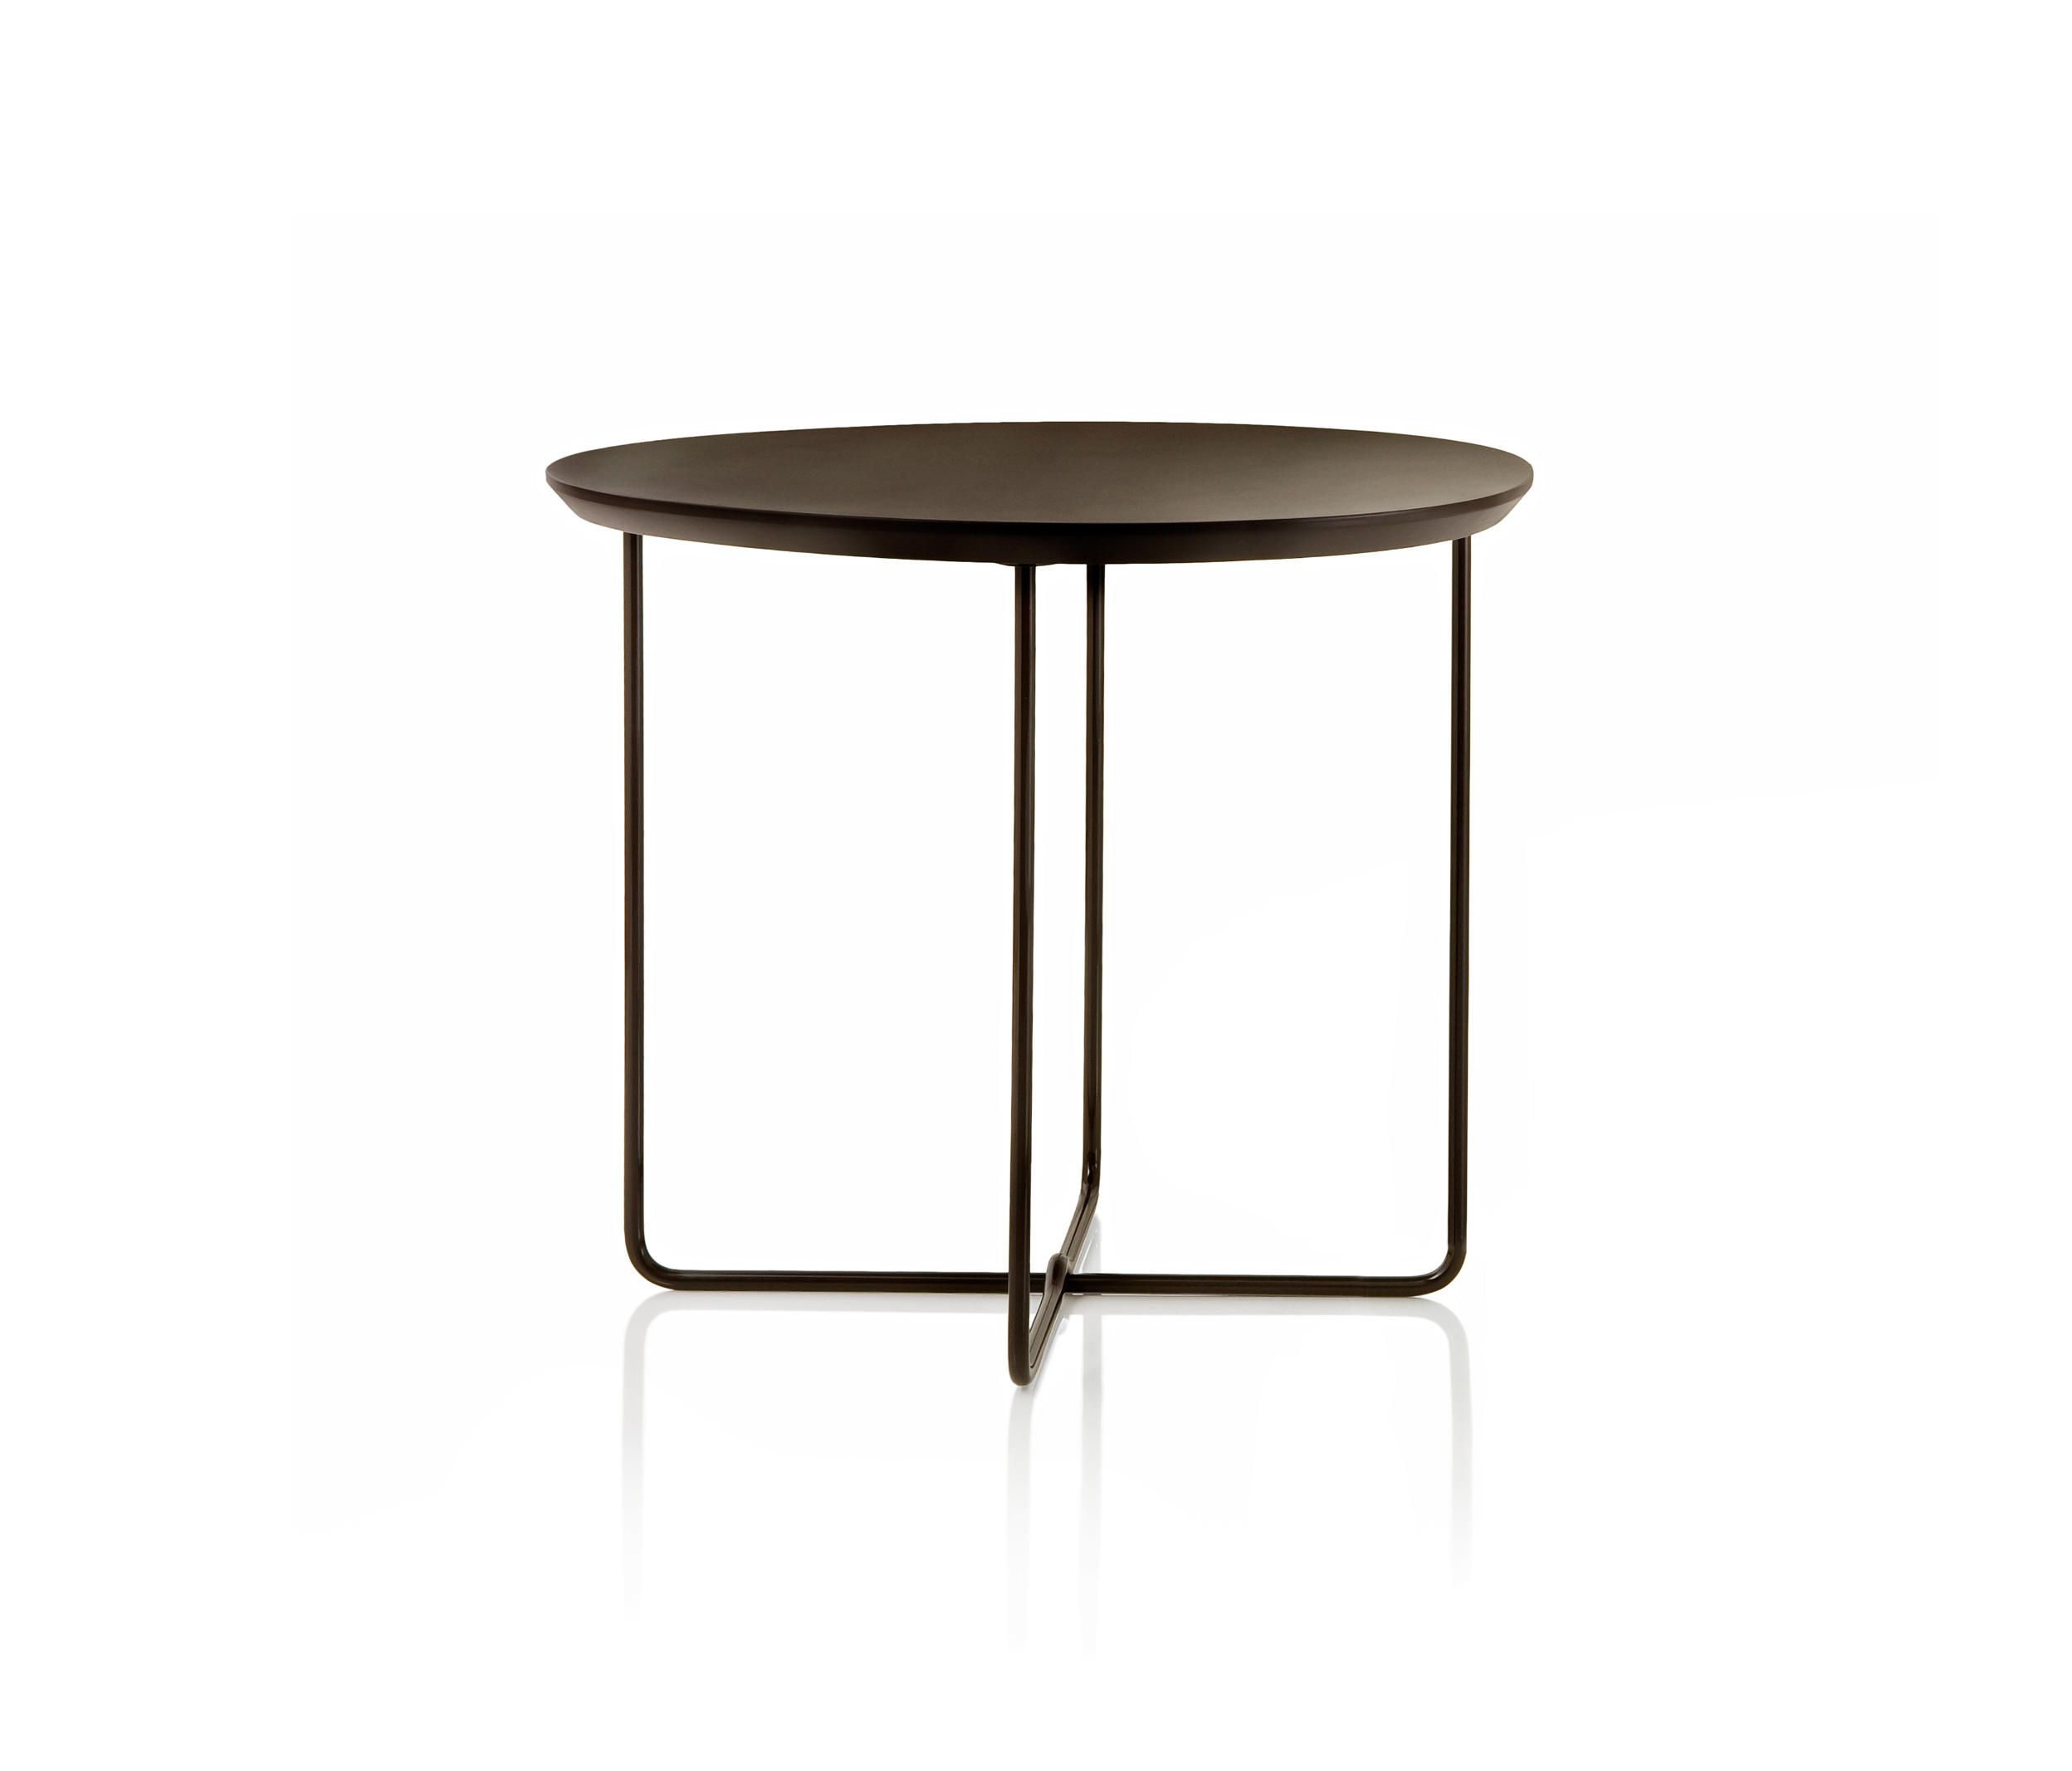 Clyde Coffee Table & Designer Furniture | Architonic With Regard To Current Clyde Round Bar Tables (View 6 of 25)